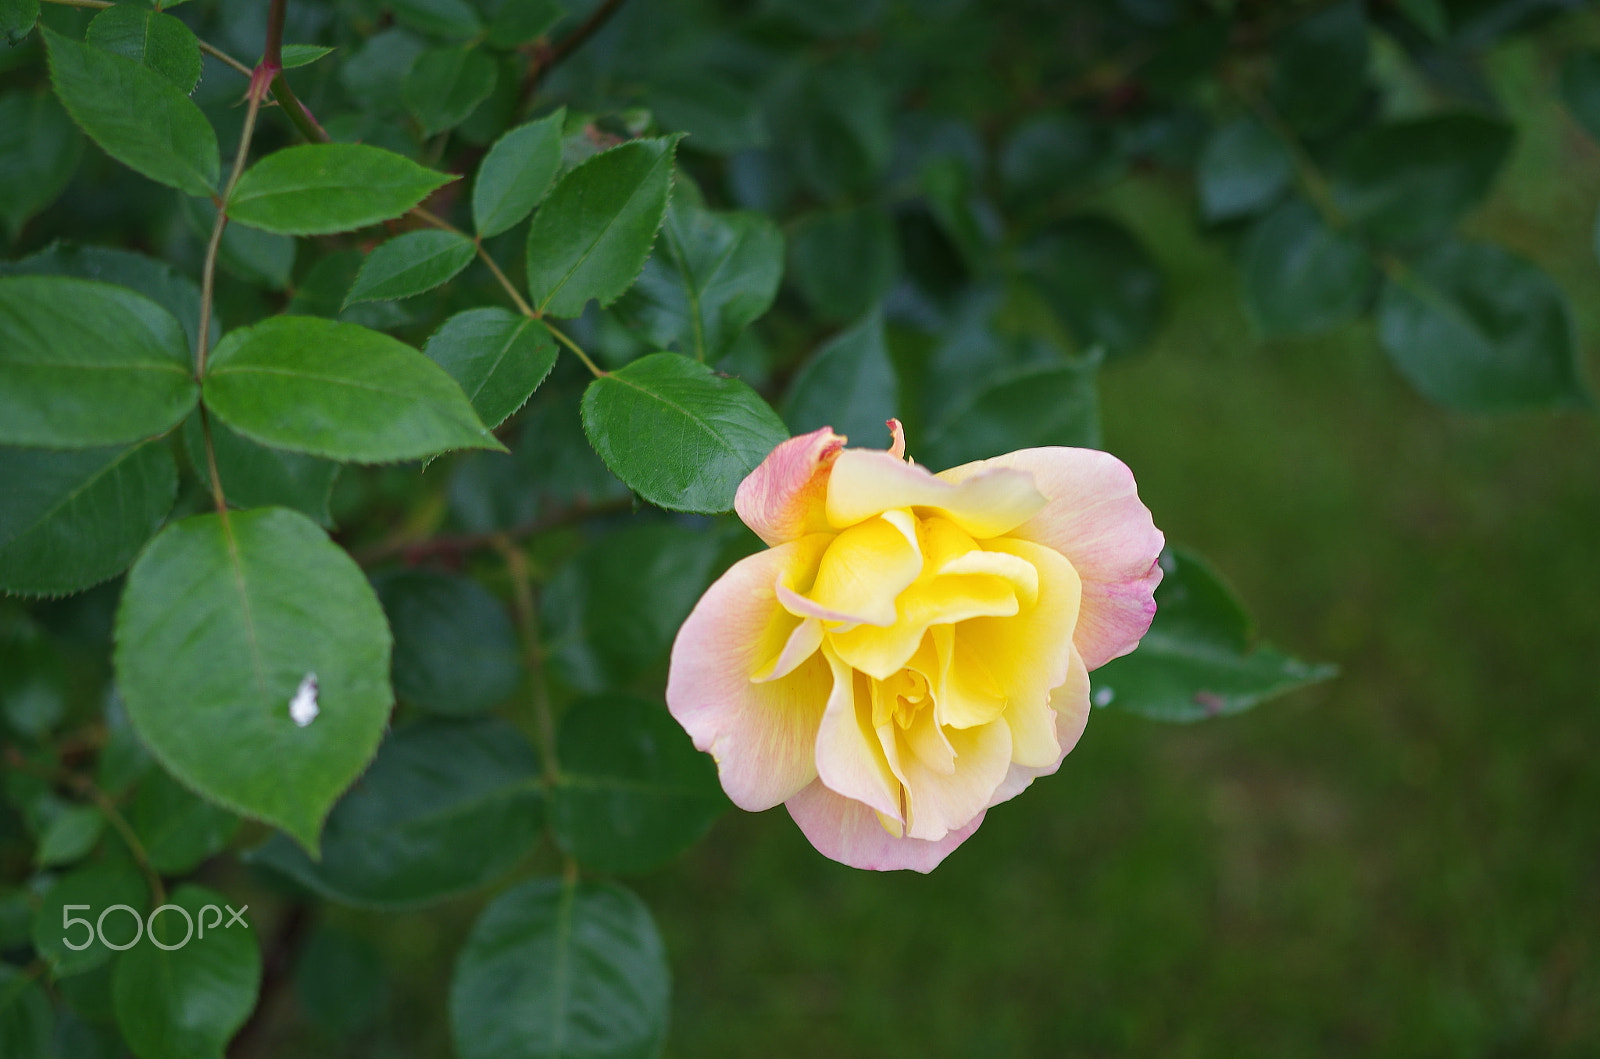 Pentax K-50 sample photo. My first rose in this year photography